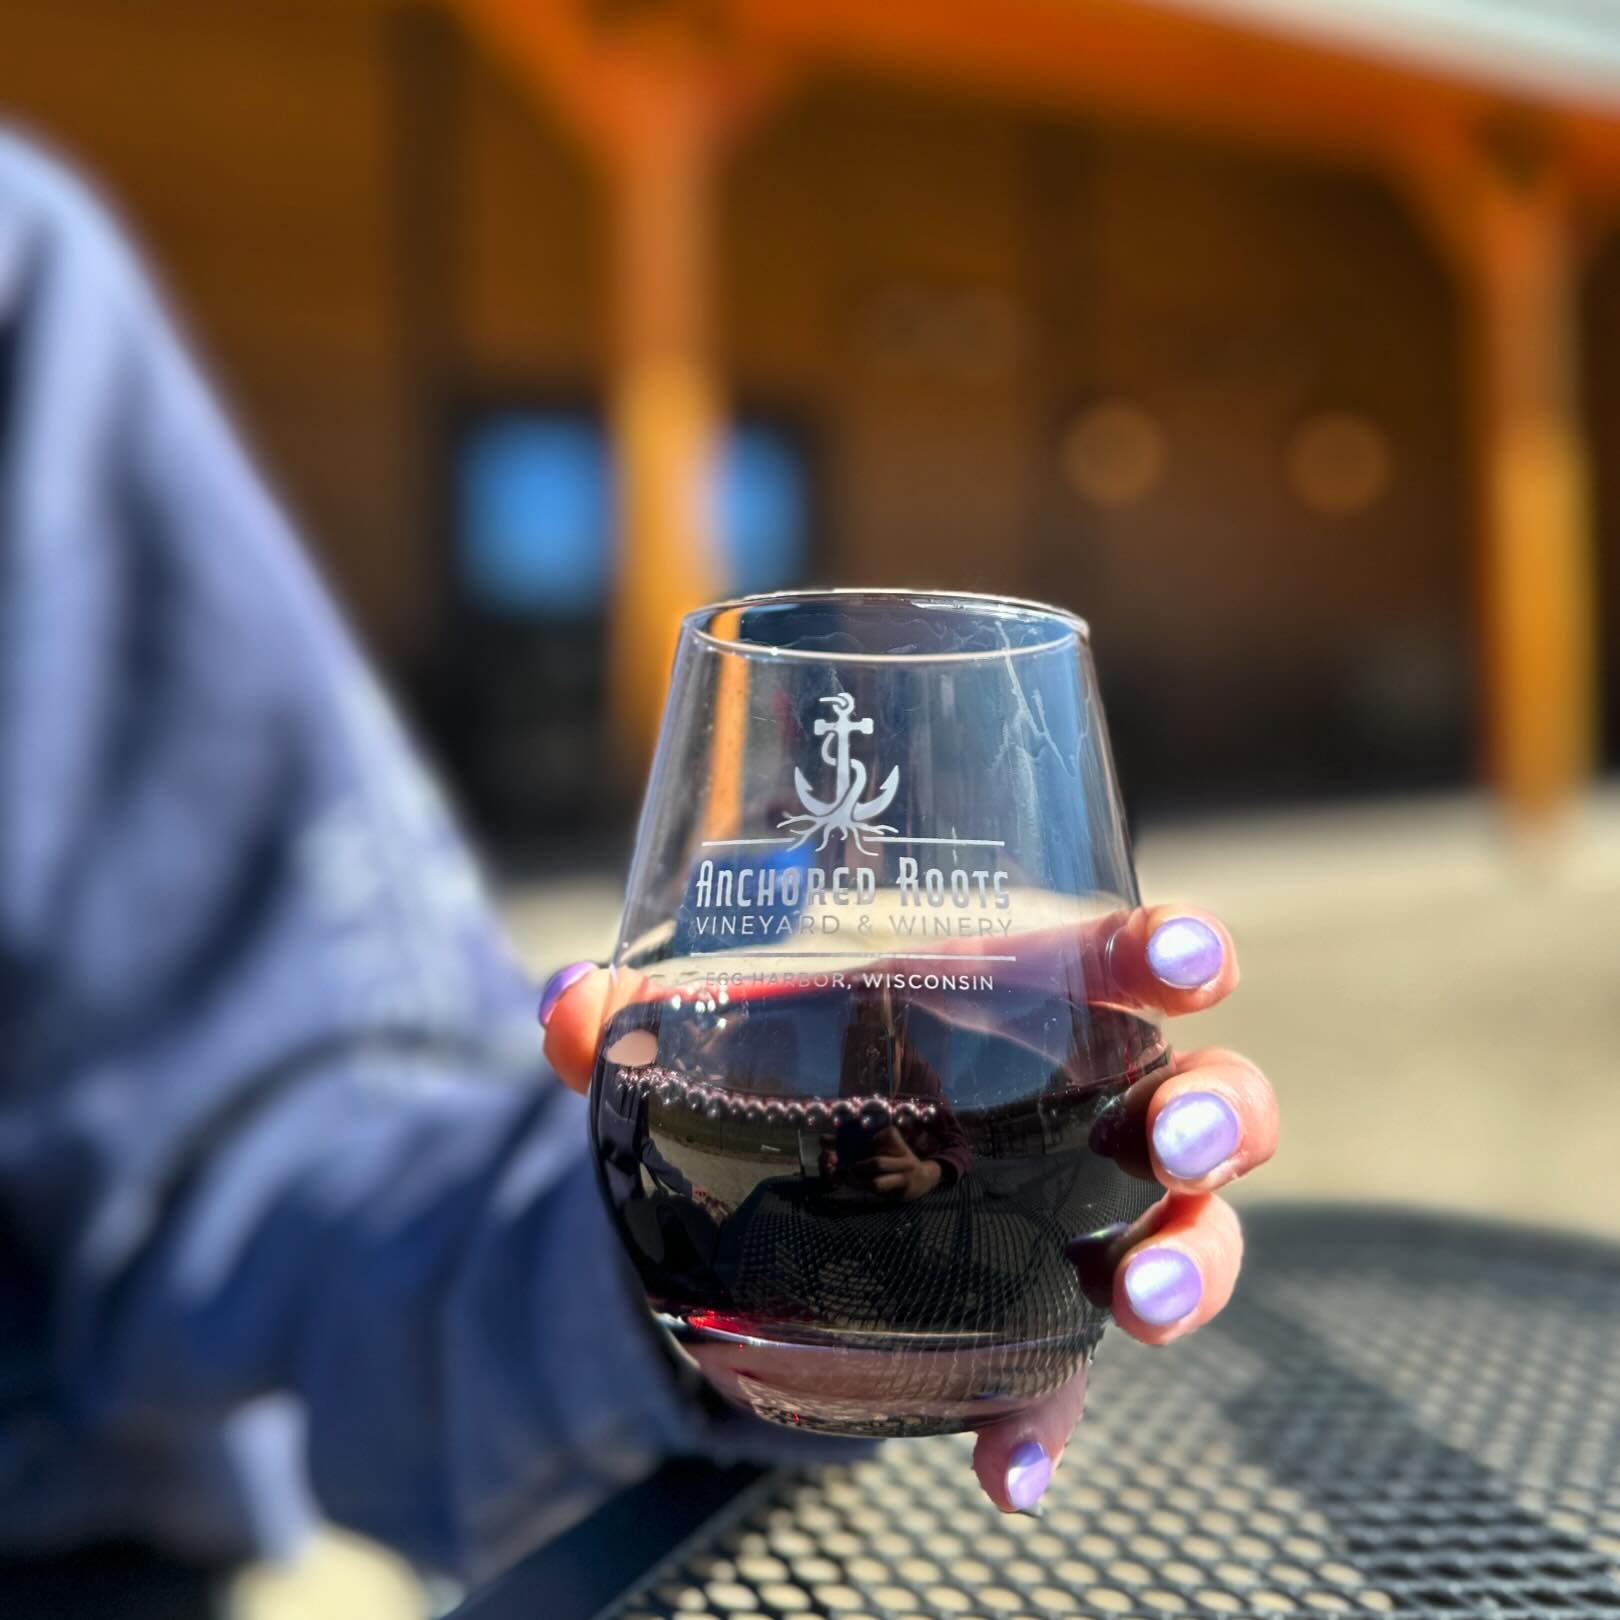 The patio is open ☀️ Grab a glass and soak up the sun!

Wine with us Friday thru Monday 🍷 Open at 11am

#doorcounty #doorcountywi #patioseason #soakupthesun #sweetsunshine #sundayfunday #wine #sipandstayawhile #sipsiphooray #winetasting #doorcountyw